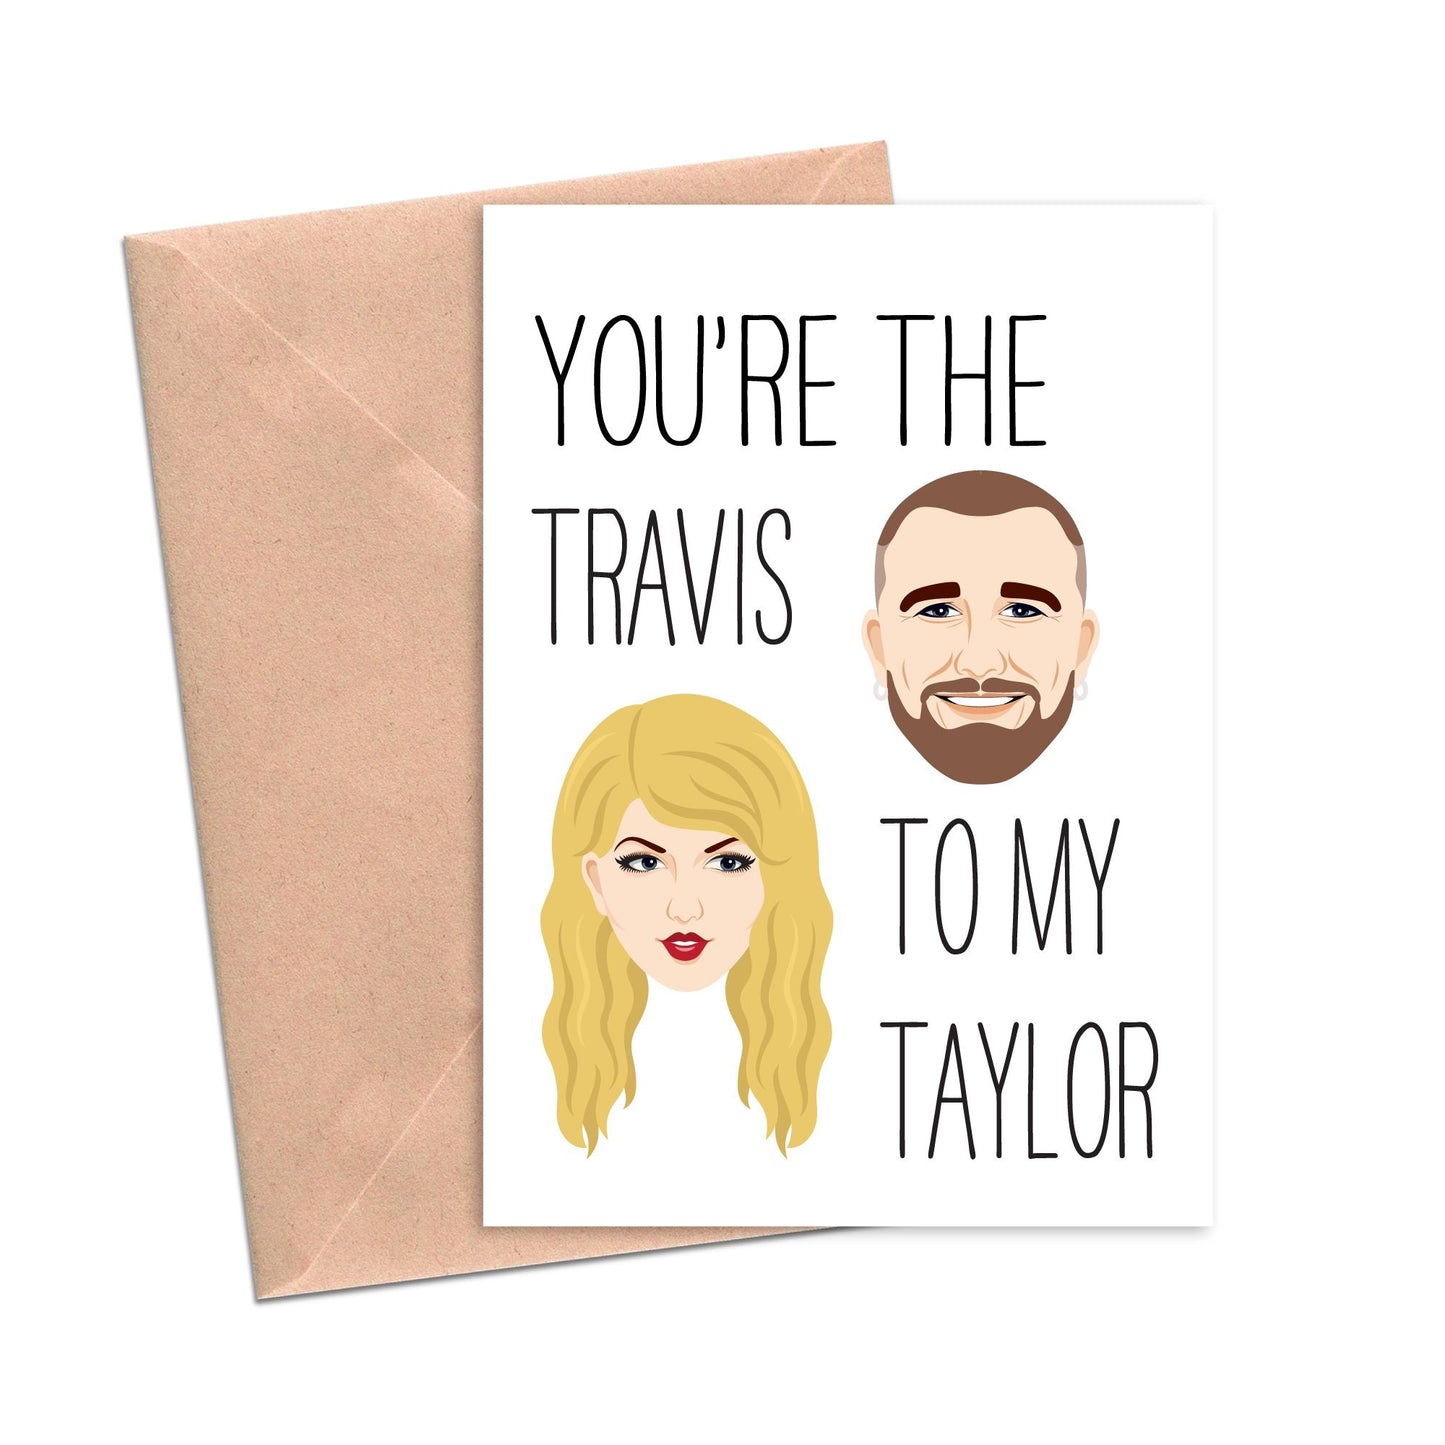 Funny Love Card You're the Taylor to My Travis-love cards-Crimson and Clover Studio